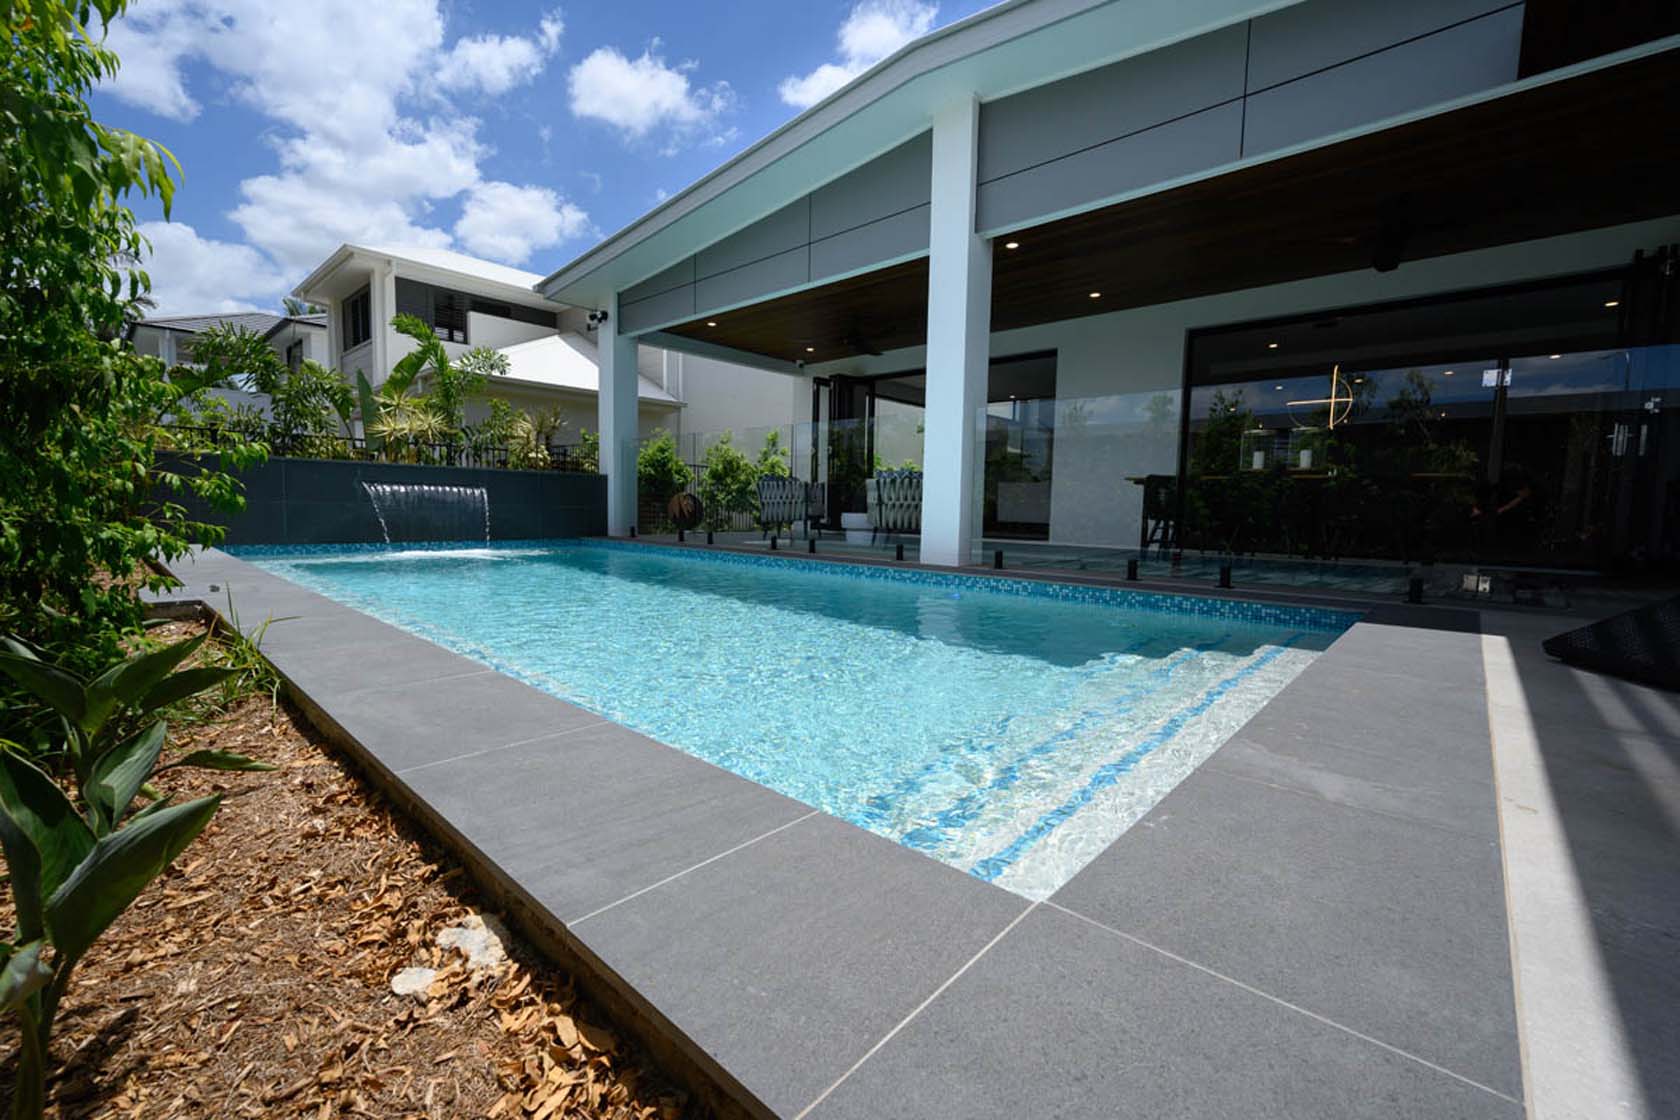 Venus Porcelain Bullnose pool coping with Amalfi Glass waterline and step marker tiles